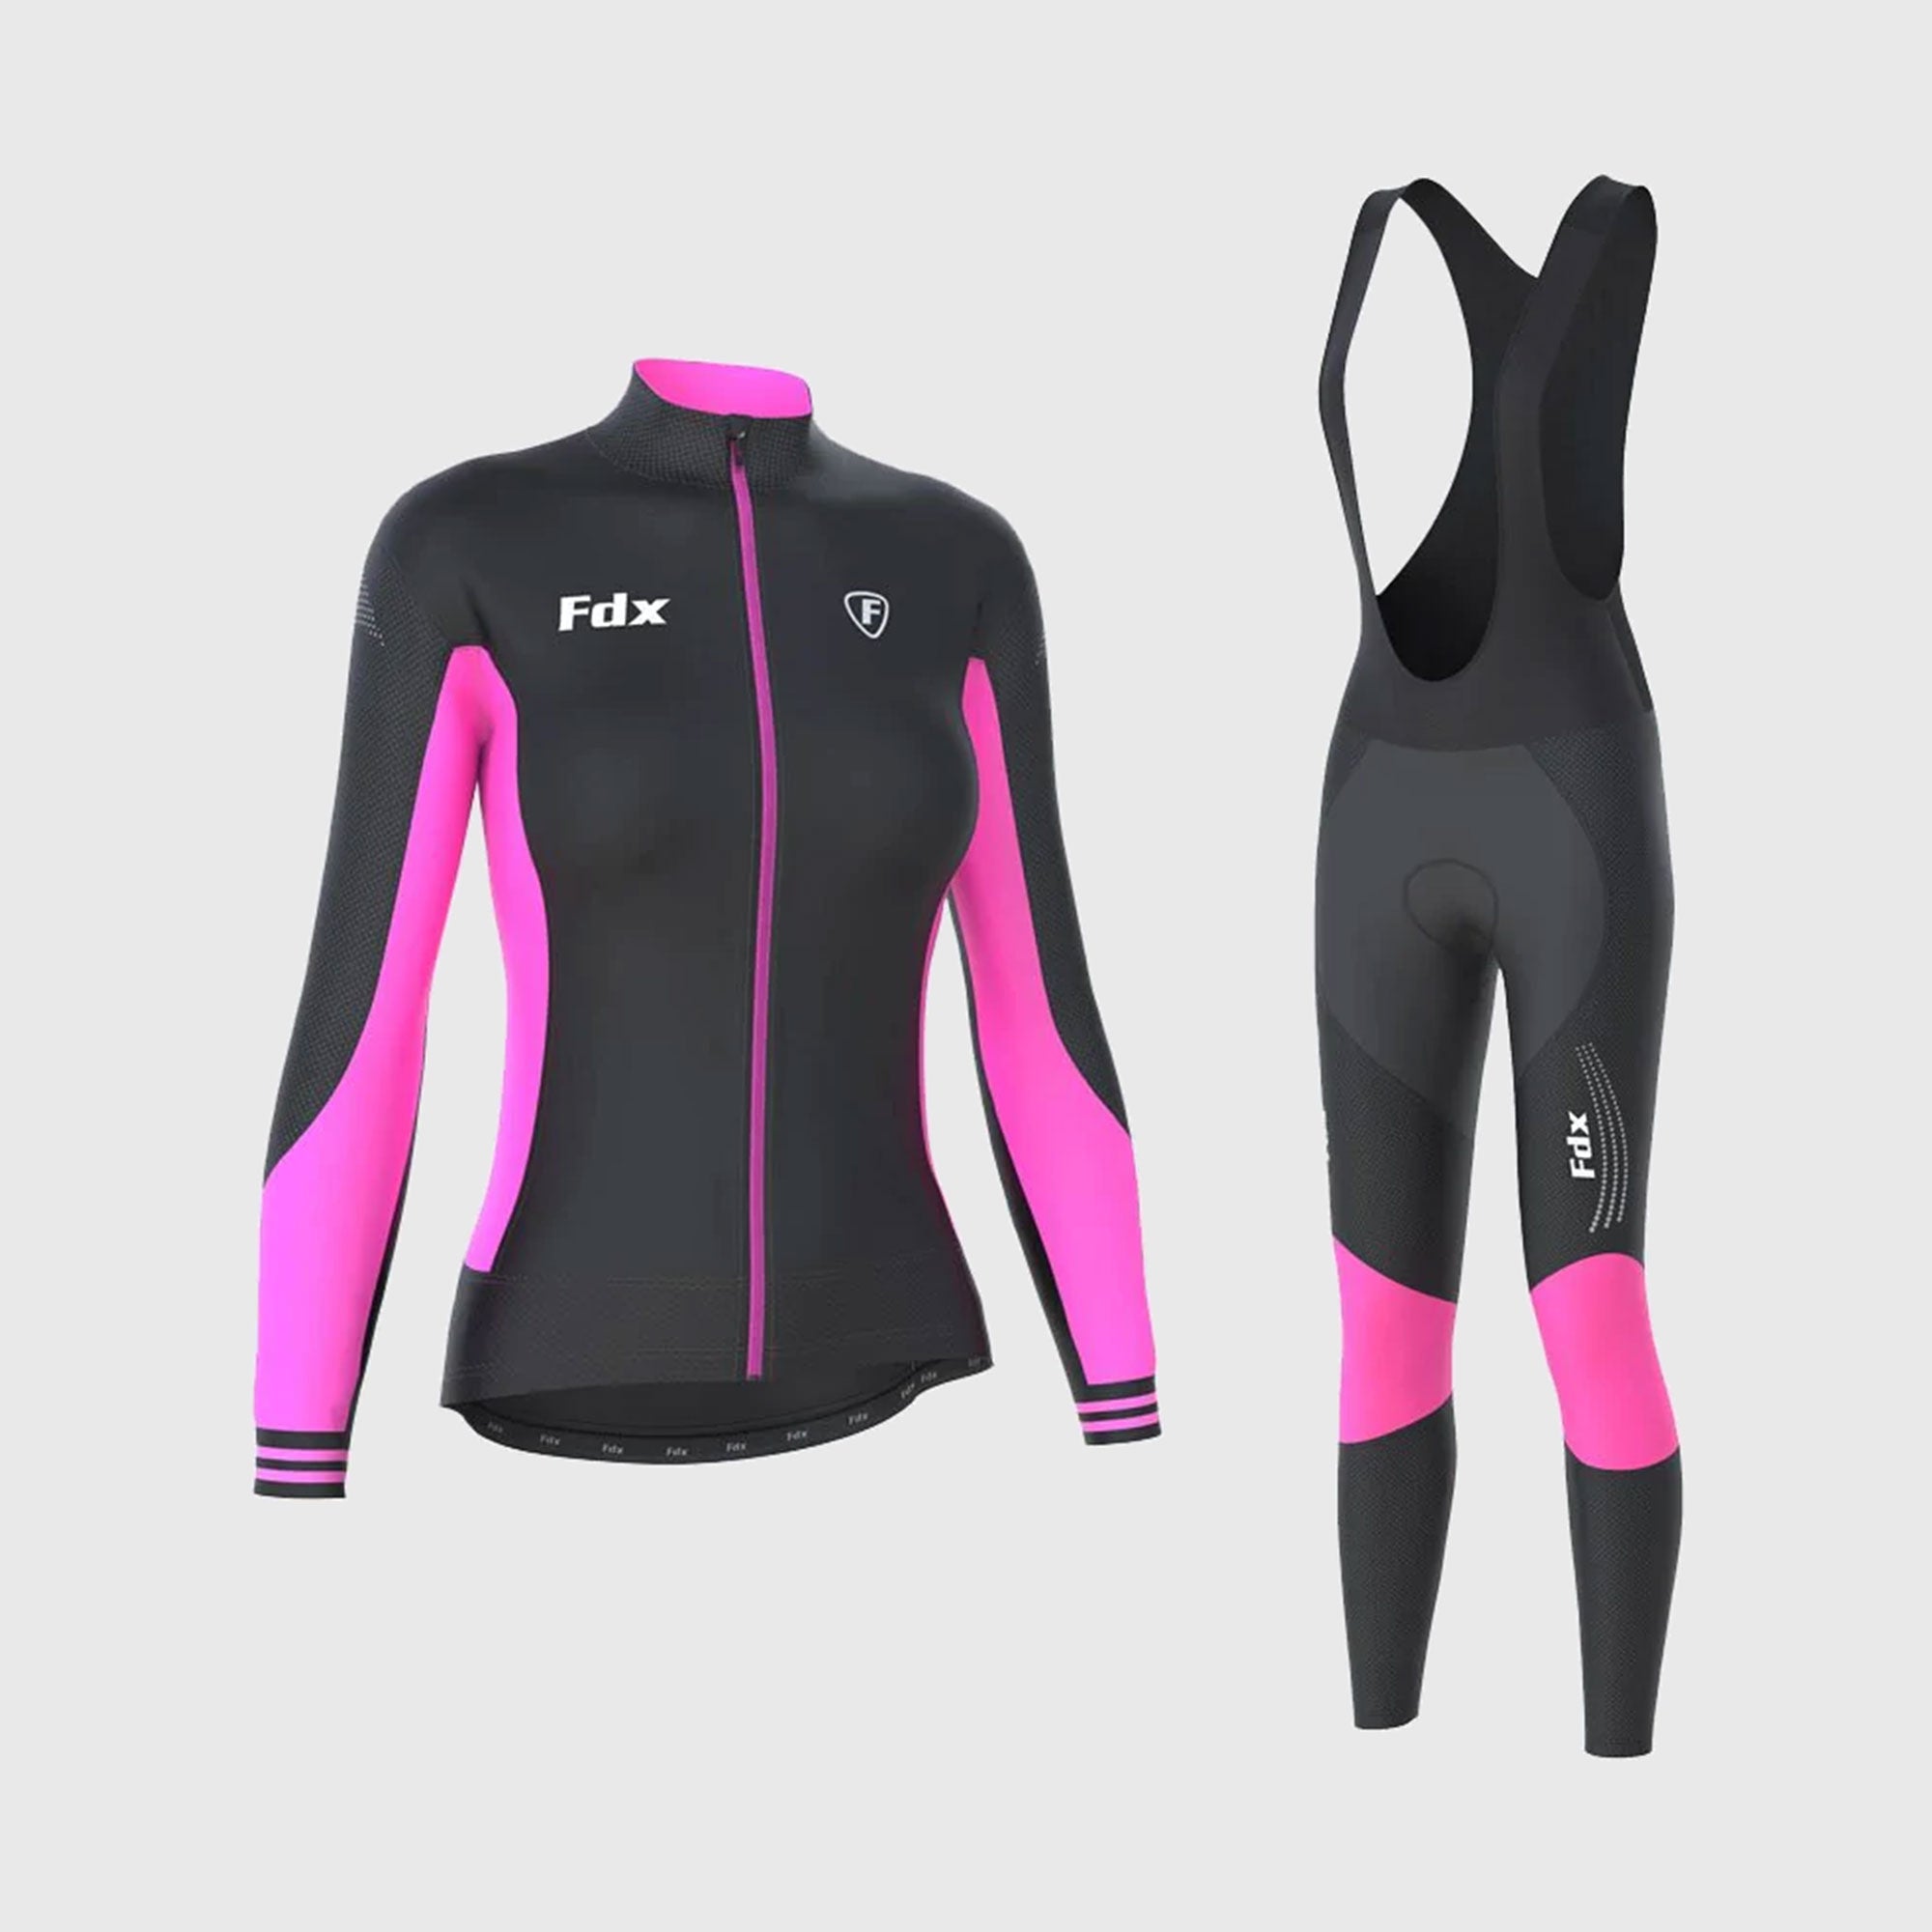 Fdx Women's Set Thermodream Thermal Long Sleeve Cycling Jersey & Bib Tights - Pink